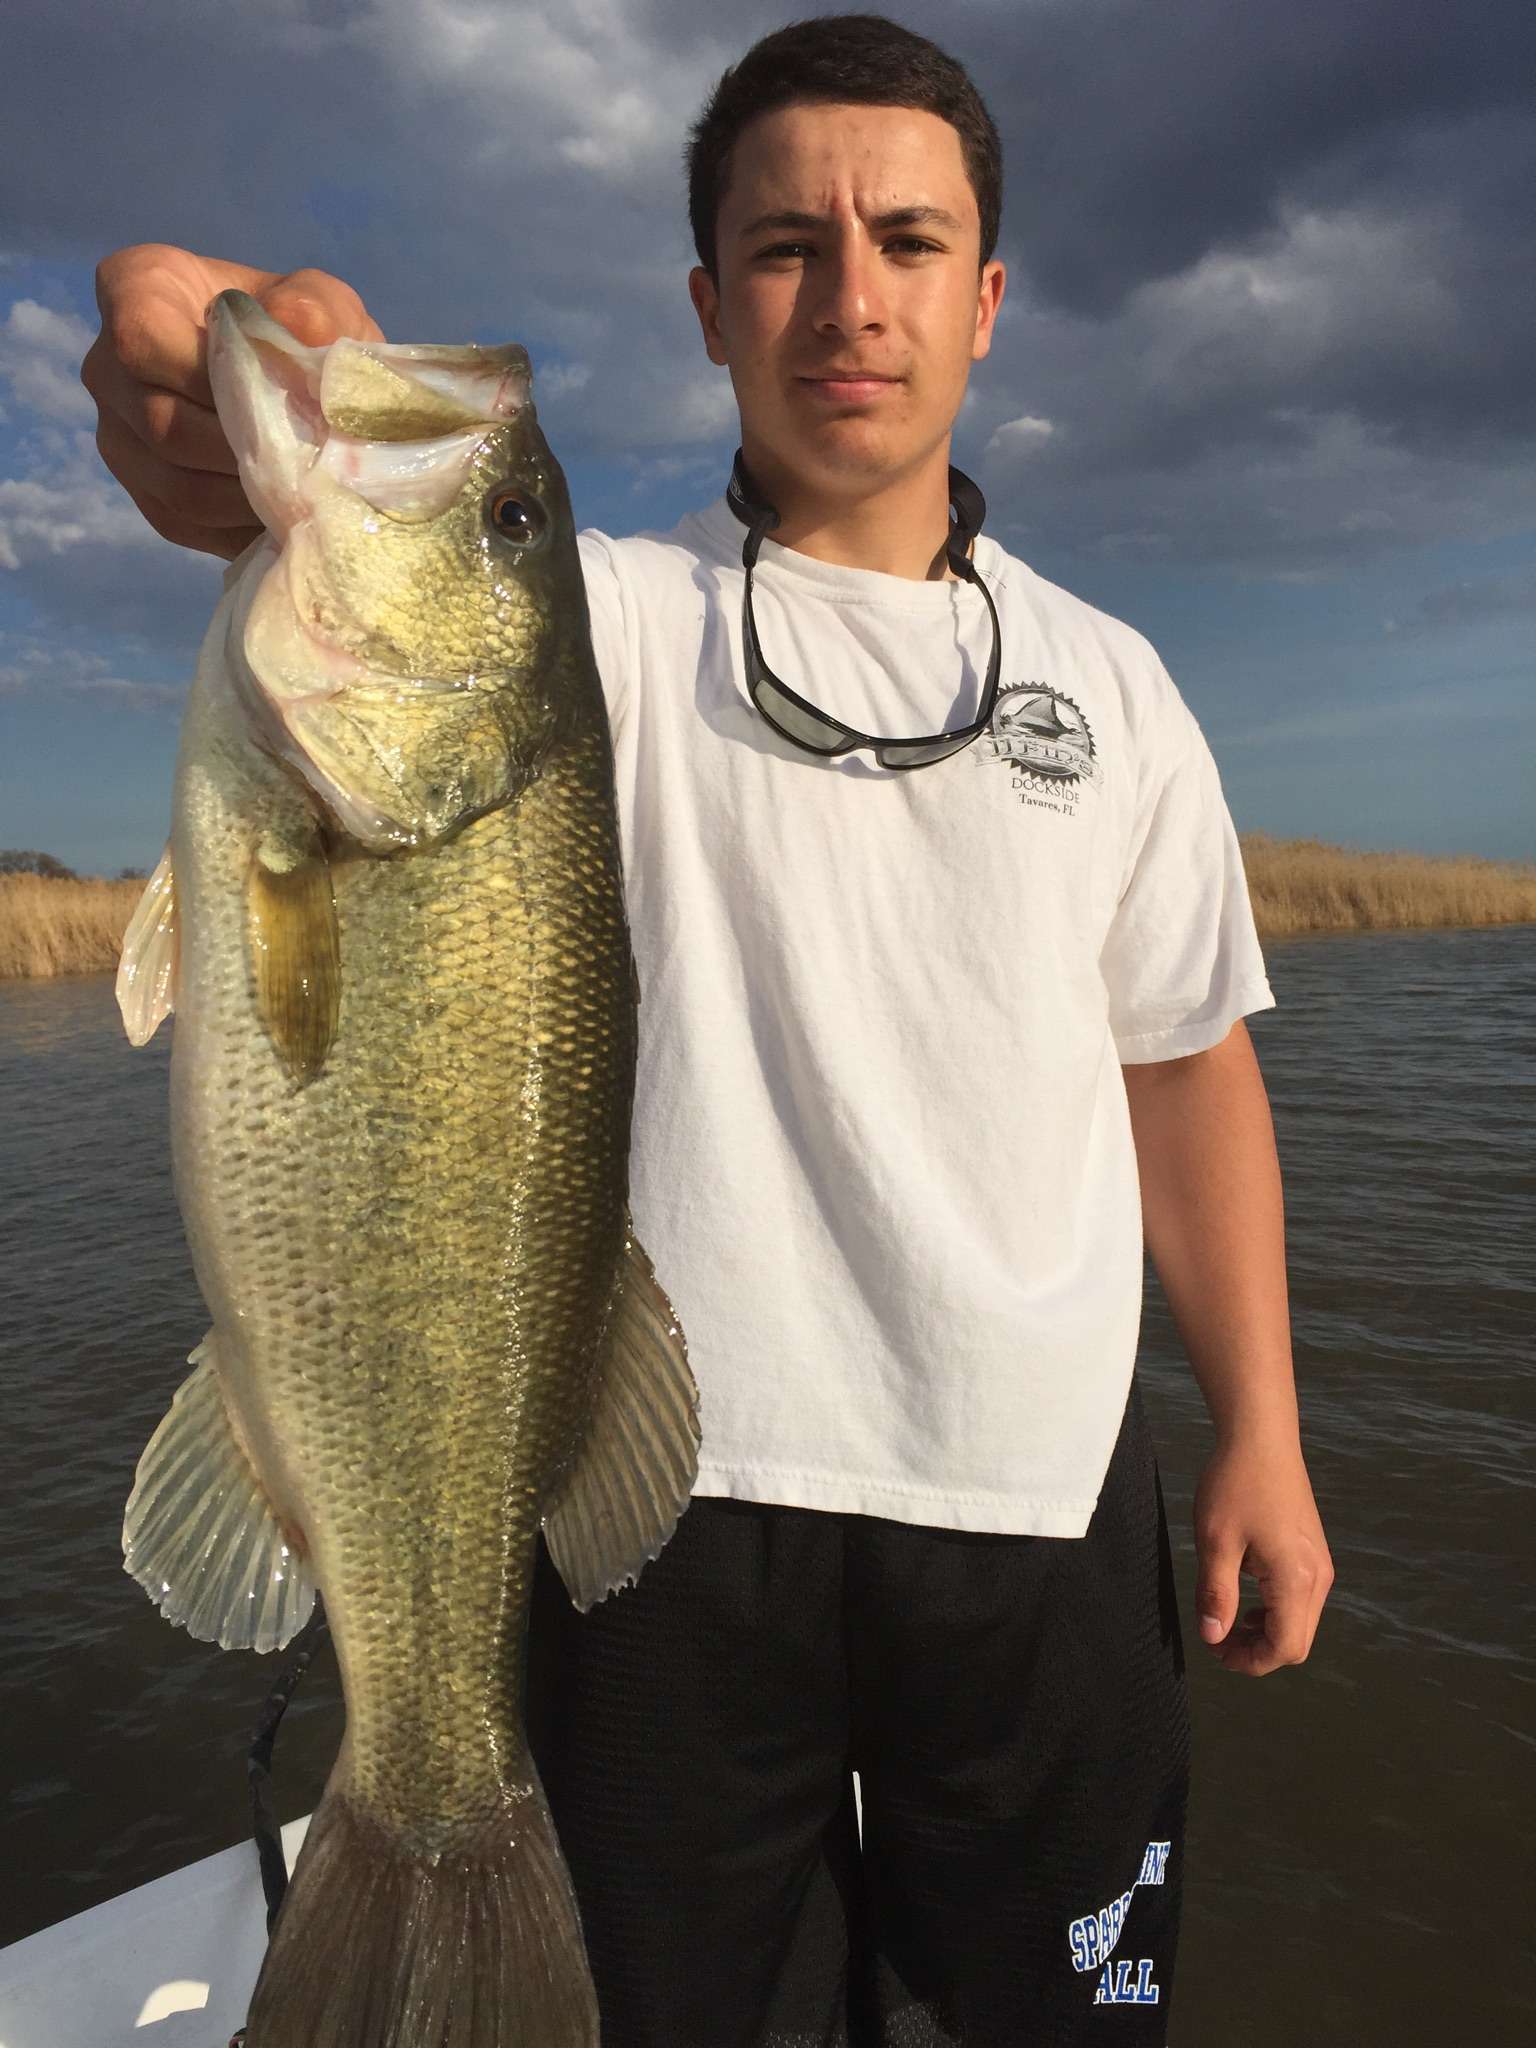 <p>Maryland: Michael Duarte</p>
<p>
Michael Duarte is a junior at Sparrows Point High School. He won the TBF state championship last summer, and in fall, he finished third in the TBF event on the Nanticoke River and second on the Potomac in a Maryland B.A.S.S. Nation event. Duarte formed and is president of his high school fishing club.</p>
